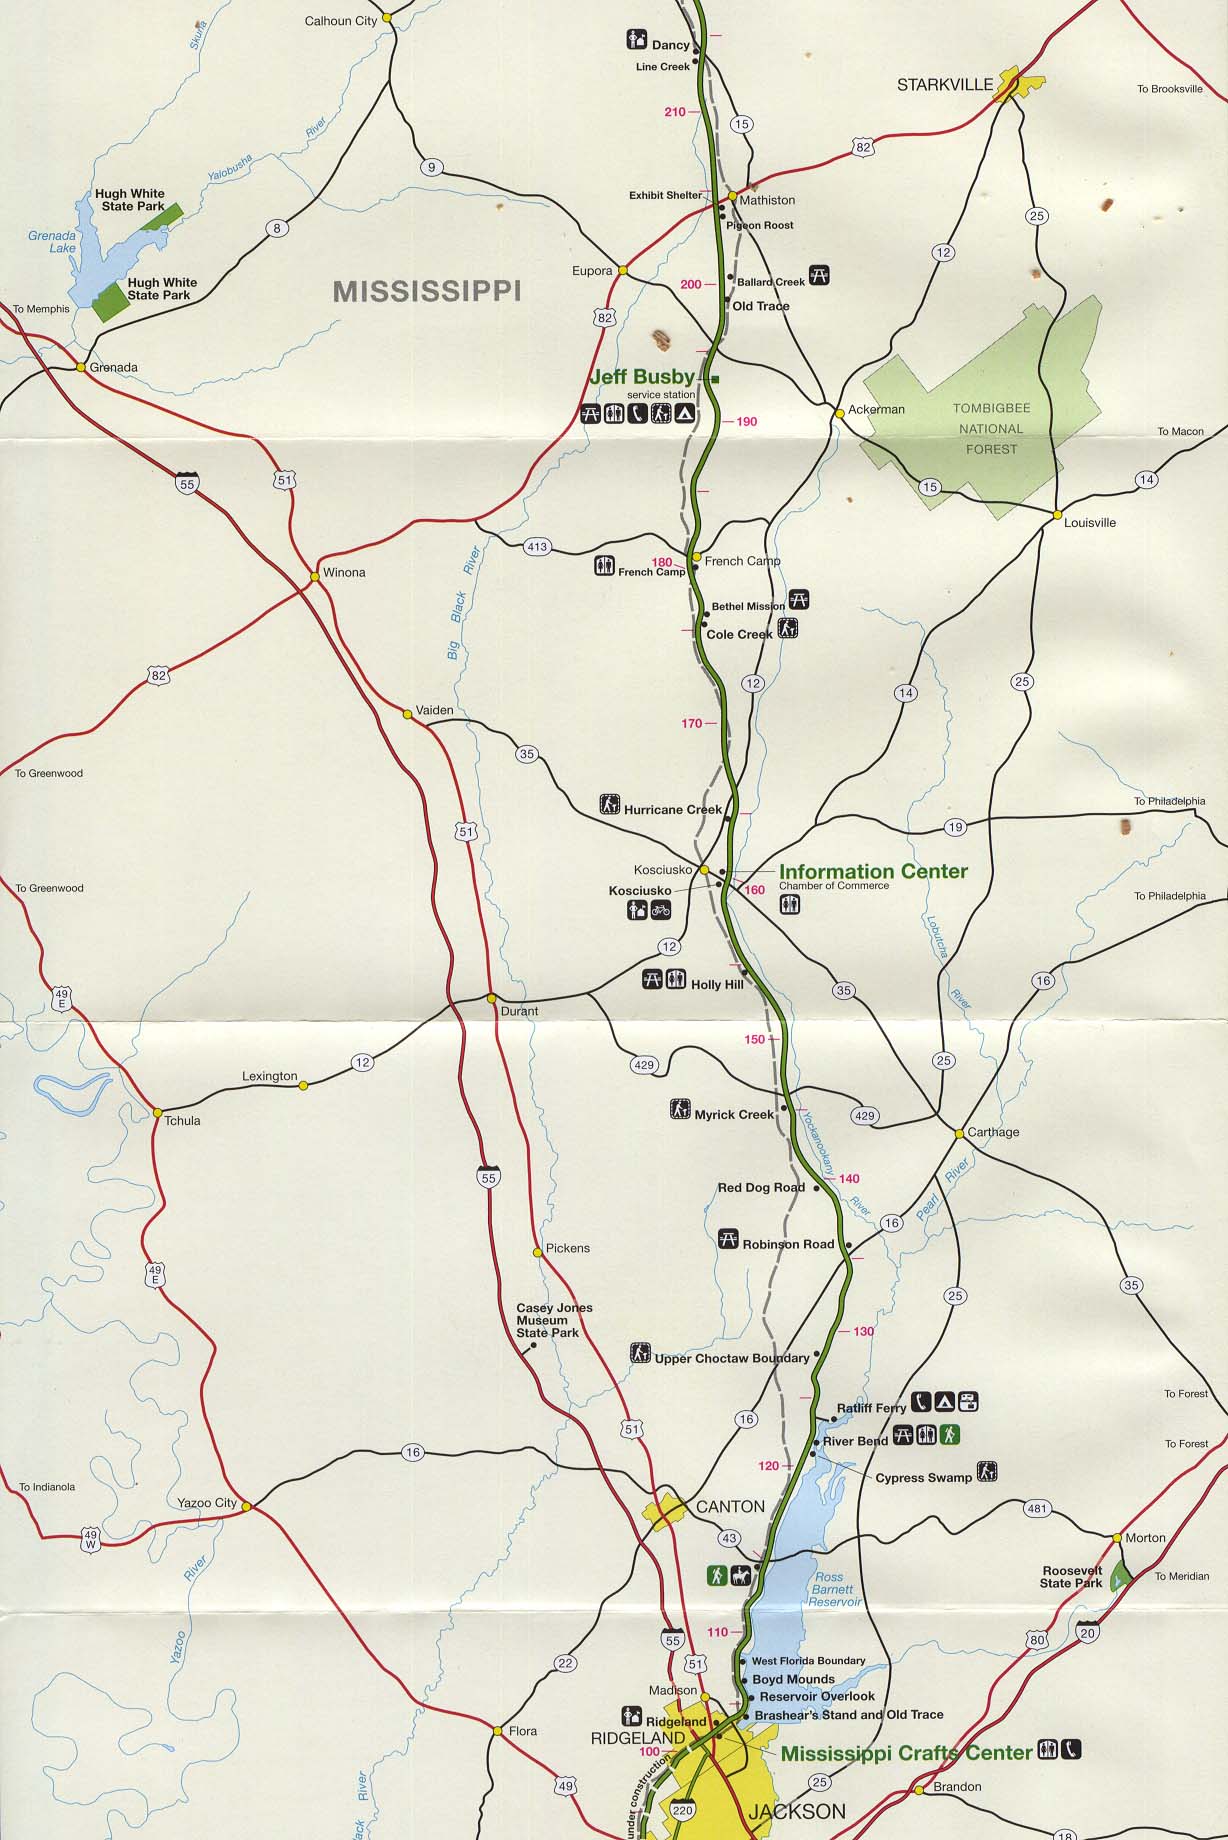  Maps of United States National Parks, Monuments and Historic Sites Natchez Trace Parkway National Scenic Trail [Mississippi, Alabama, and Tennessee] (Jackson to Dancy, Mississippi) 1997 (323K) 